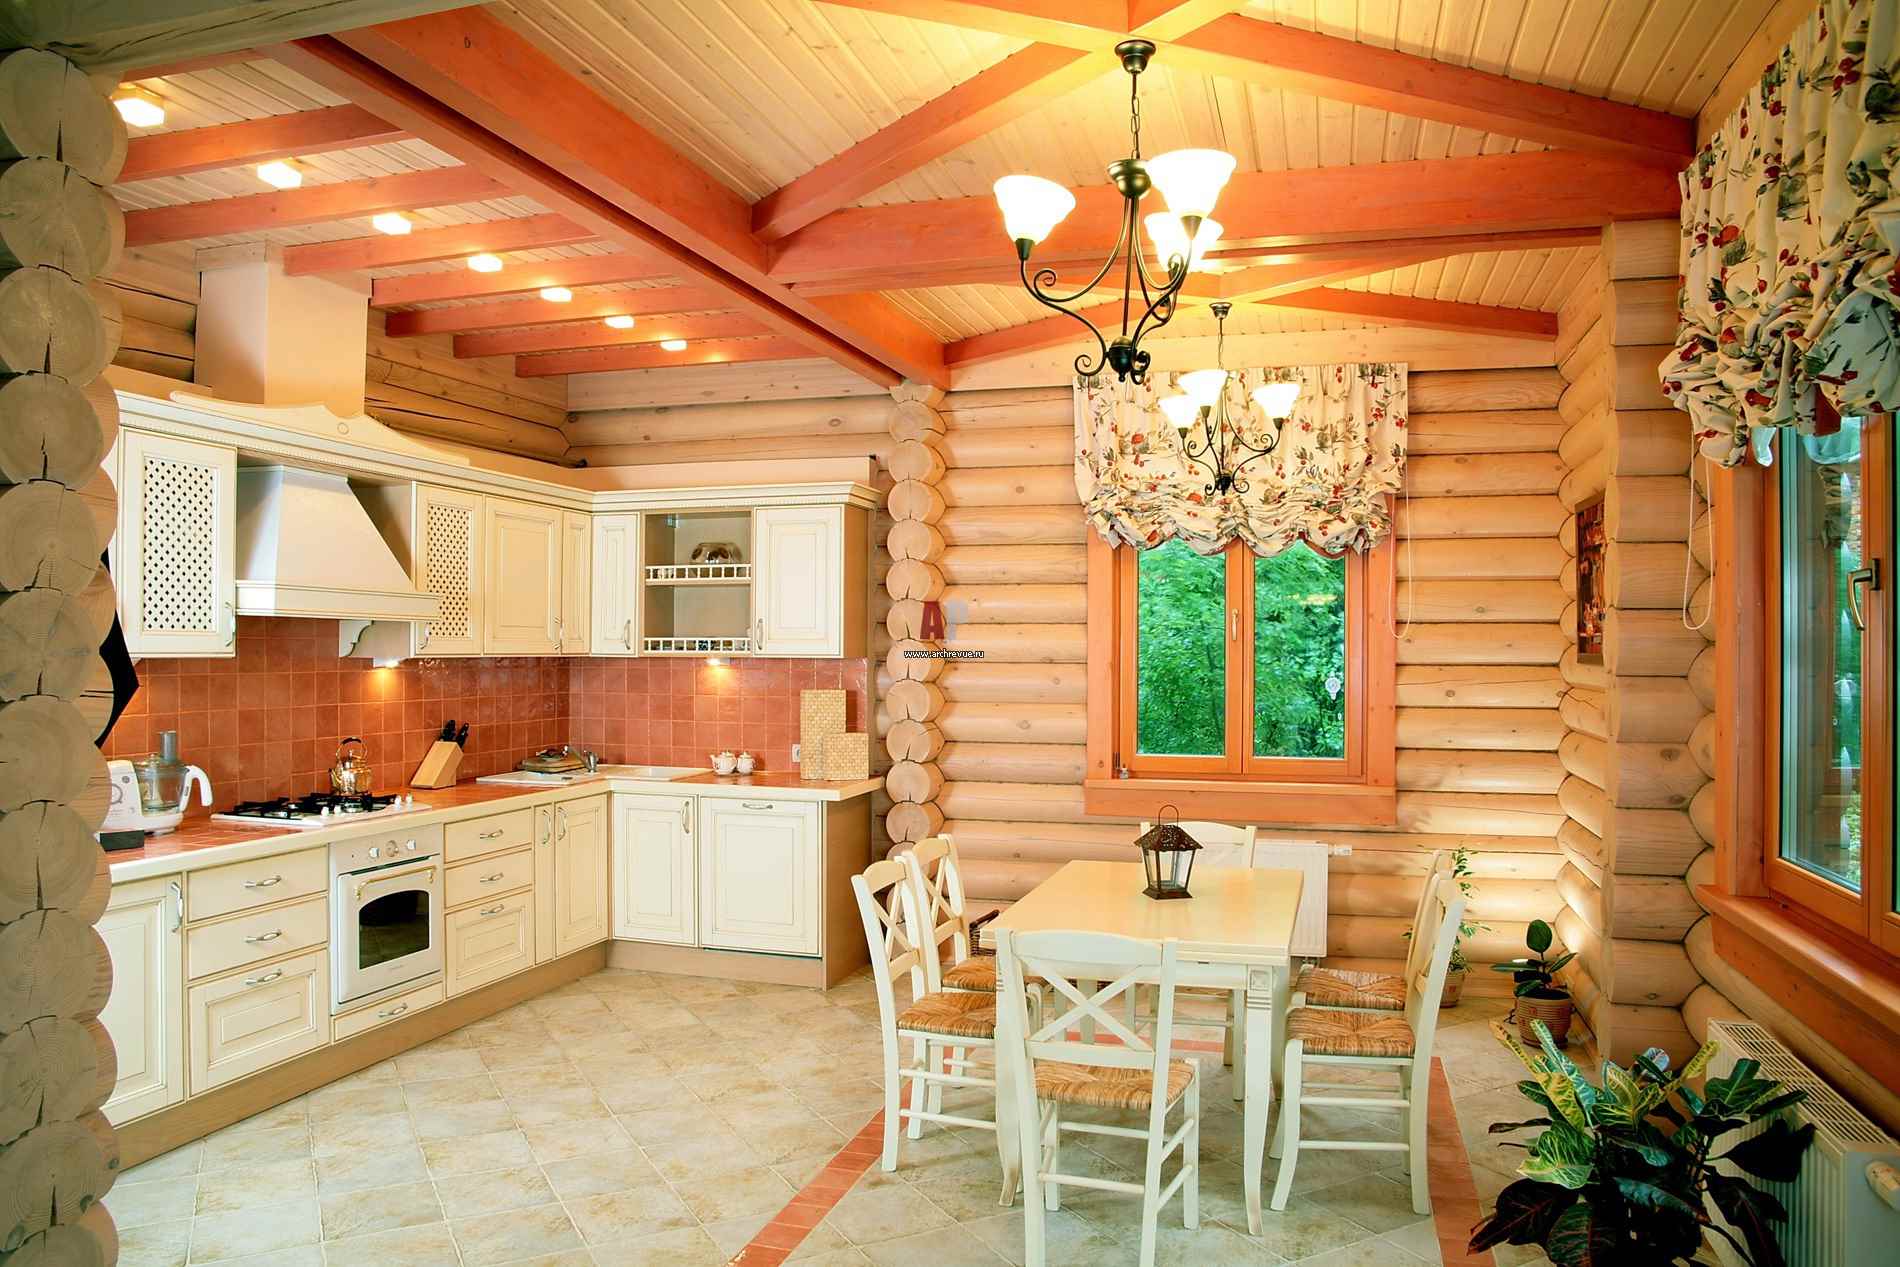 An example of a bright kitchen style in a wooden house